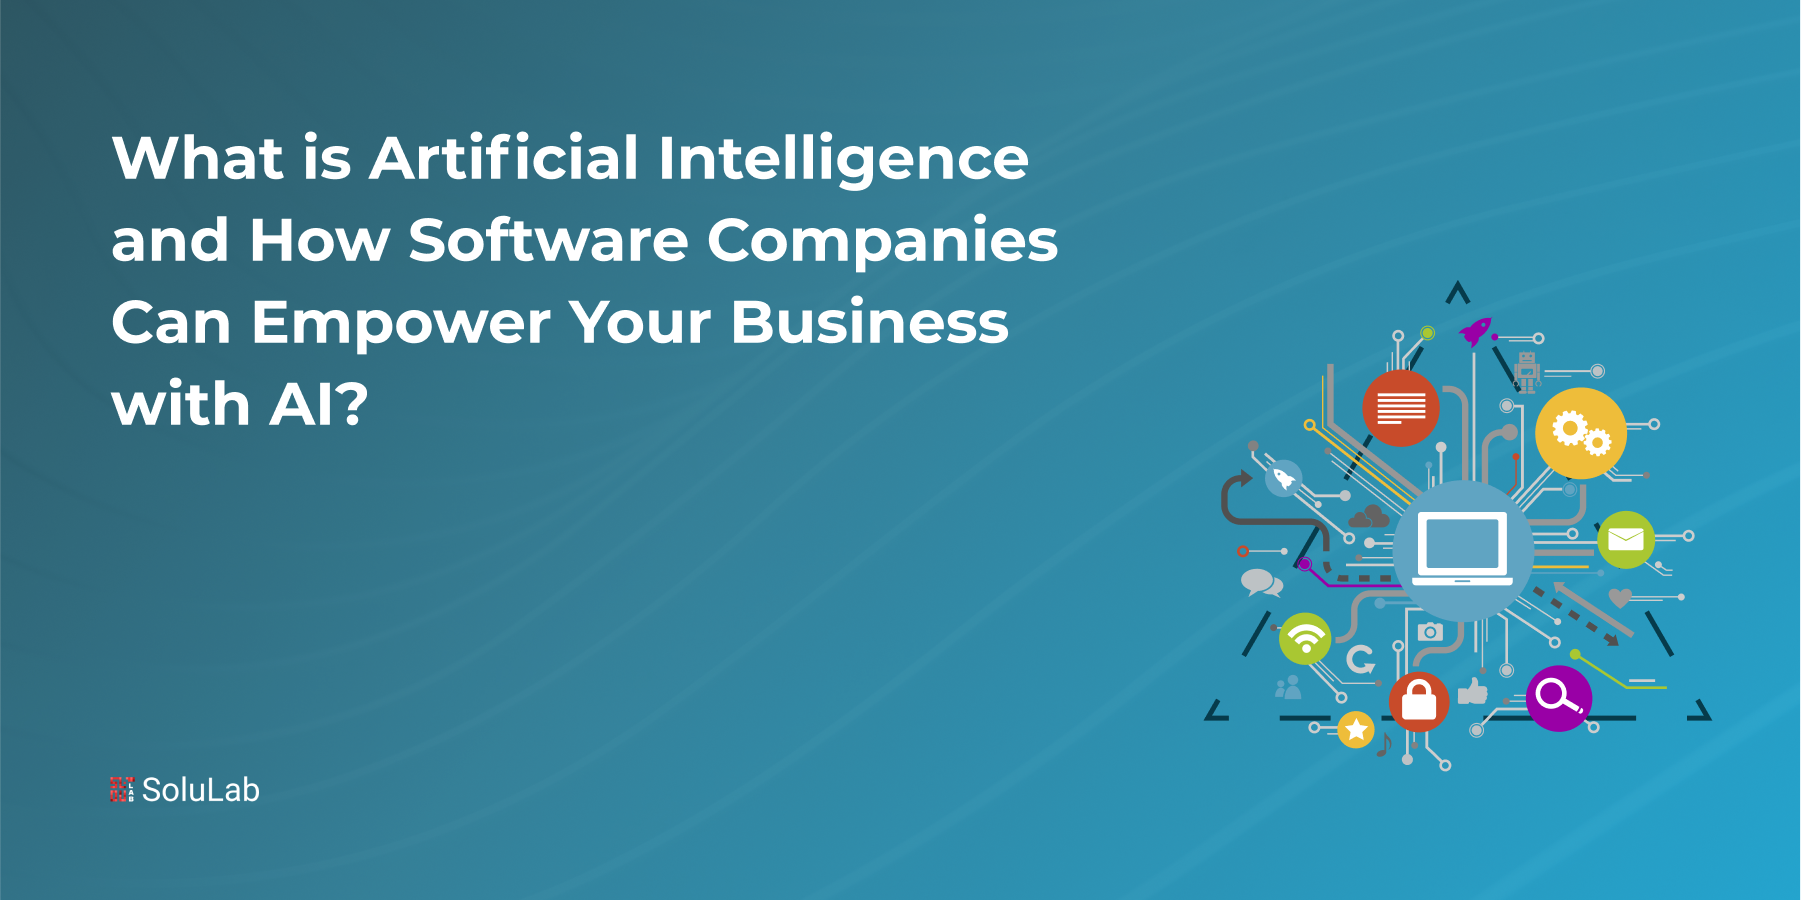 What is Artificial Intelligence and How Software Companies Can Empower Your Business with AI?